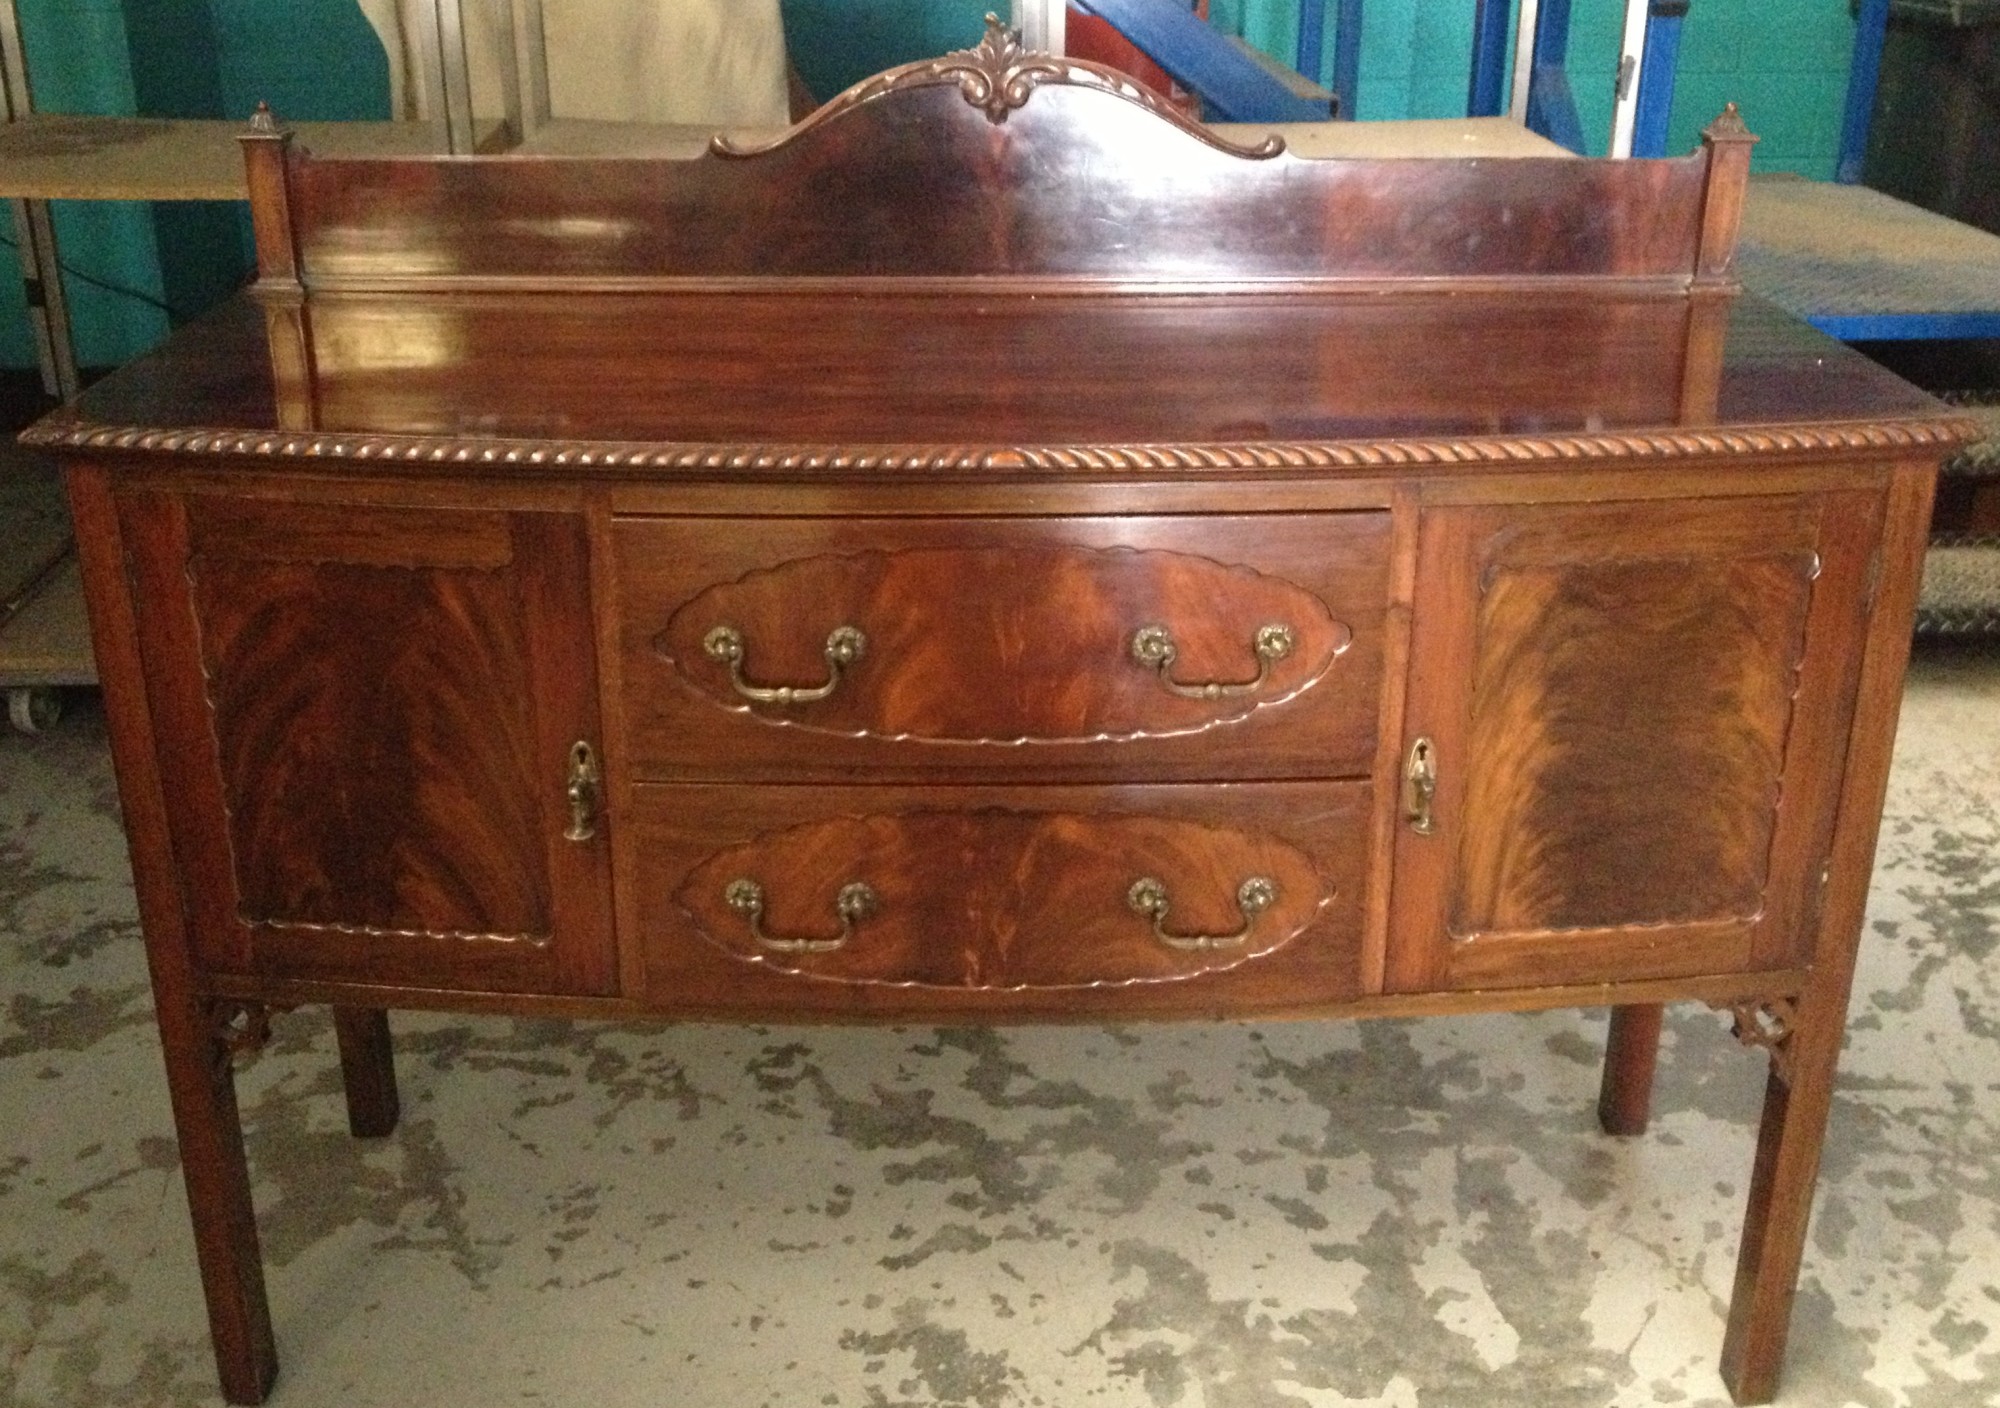 Mahogany Bow Fronted Sideboard with Gallery Back